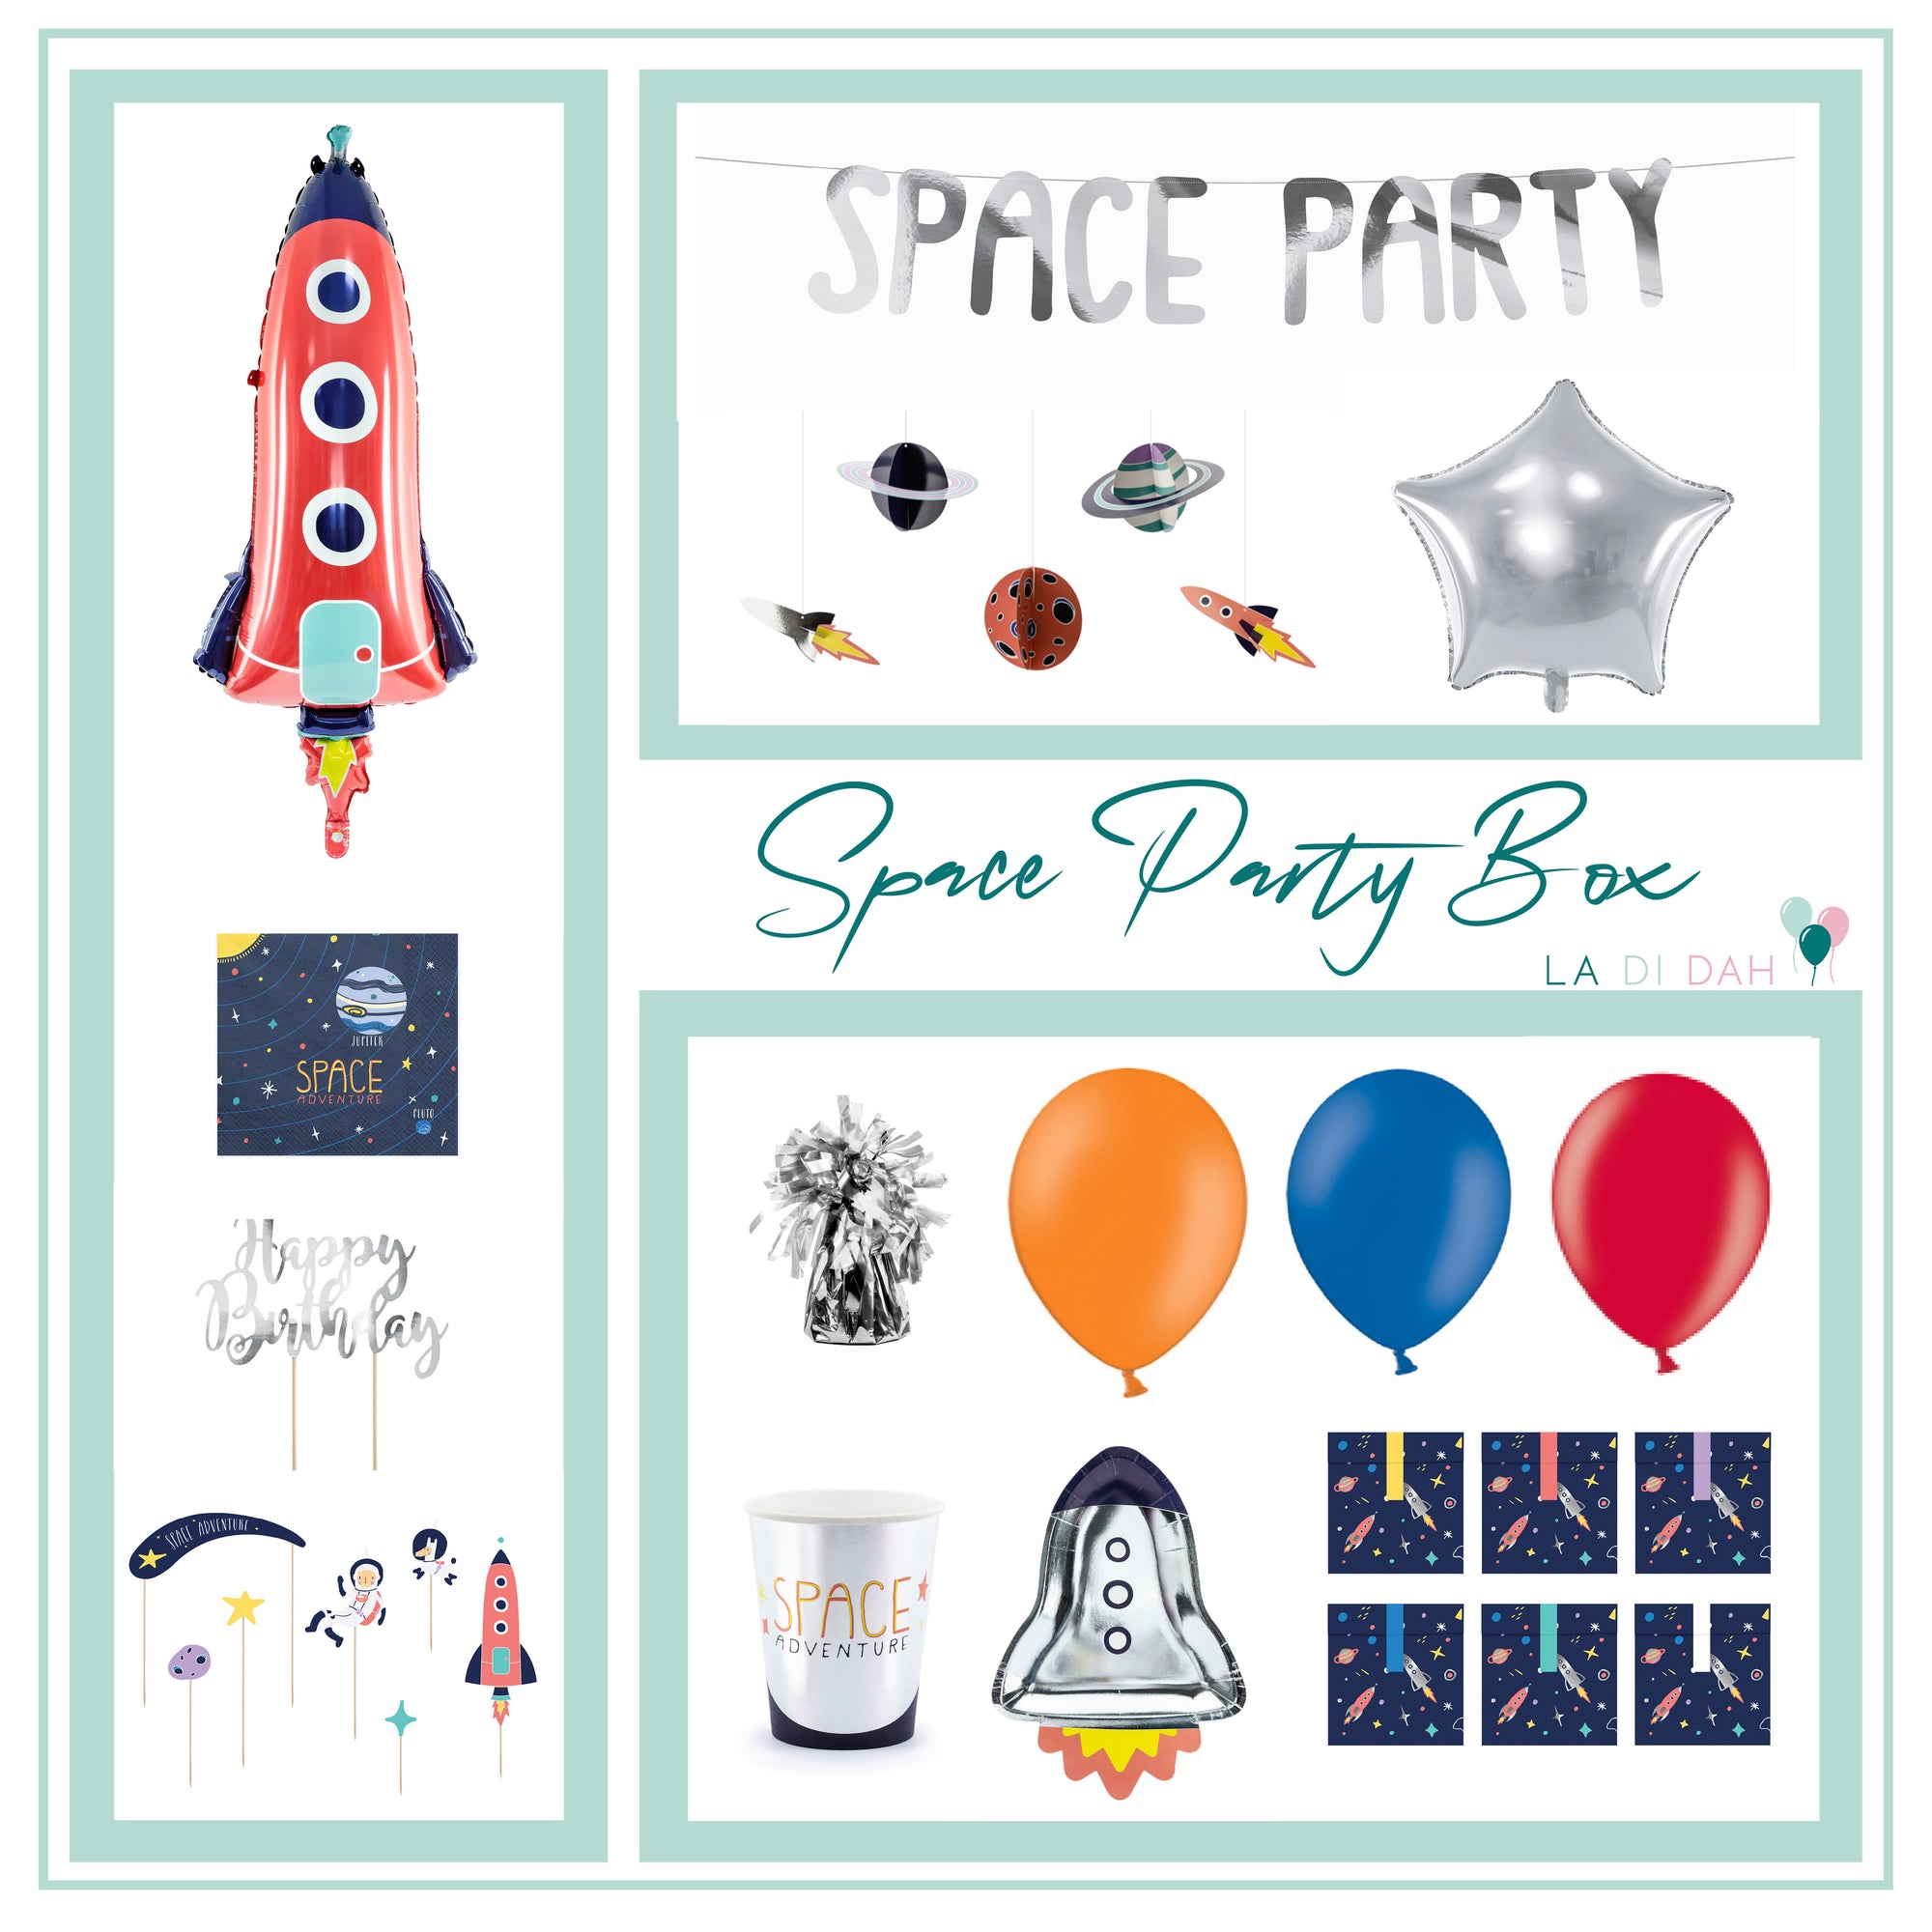 Space party styled image with garlands, cake topper, napkins, rocket shaped plates, space party cups.